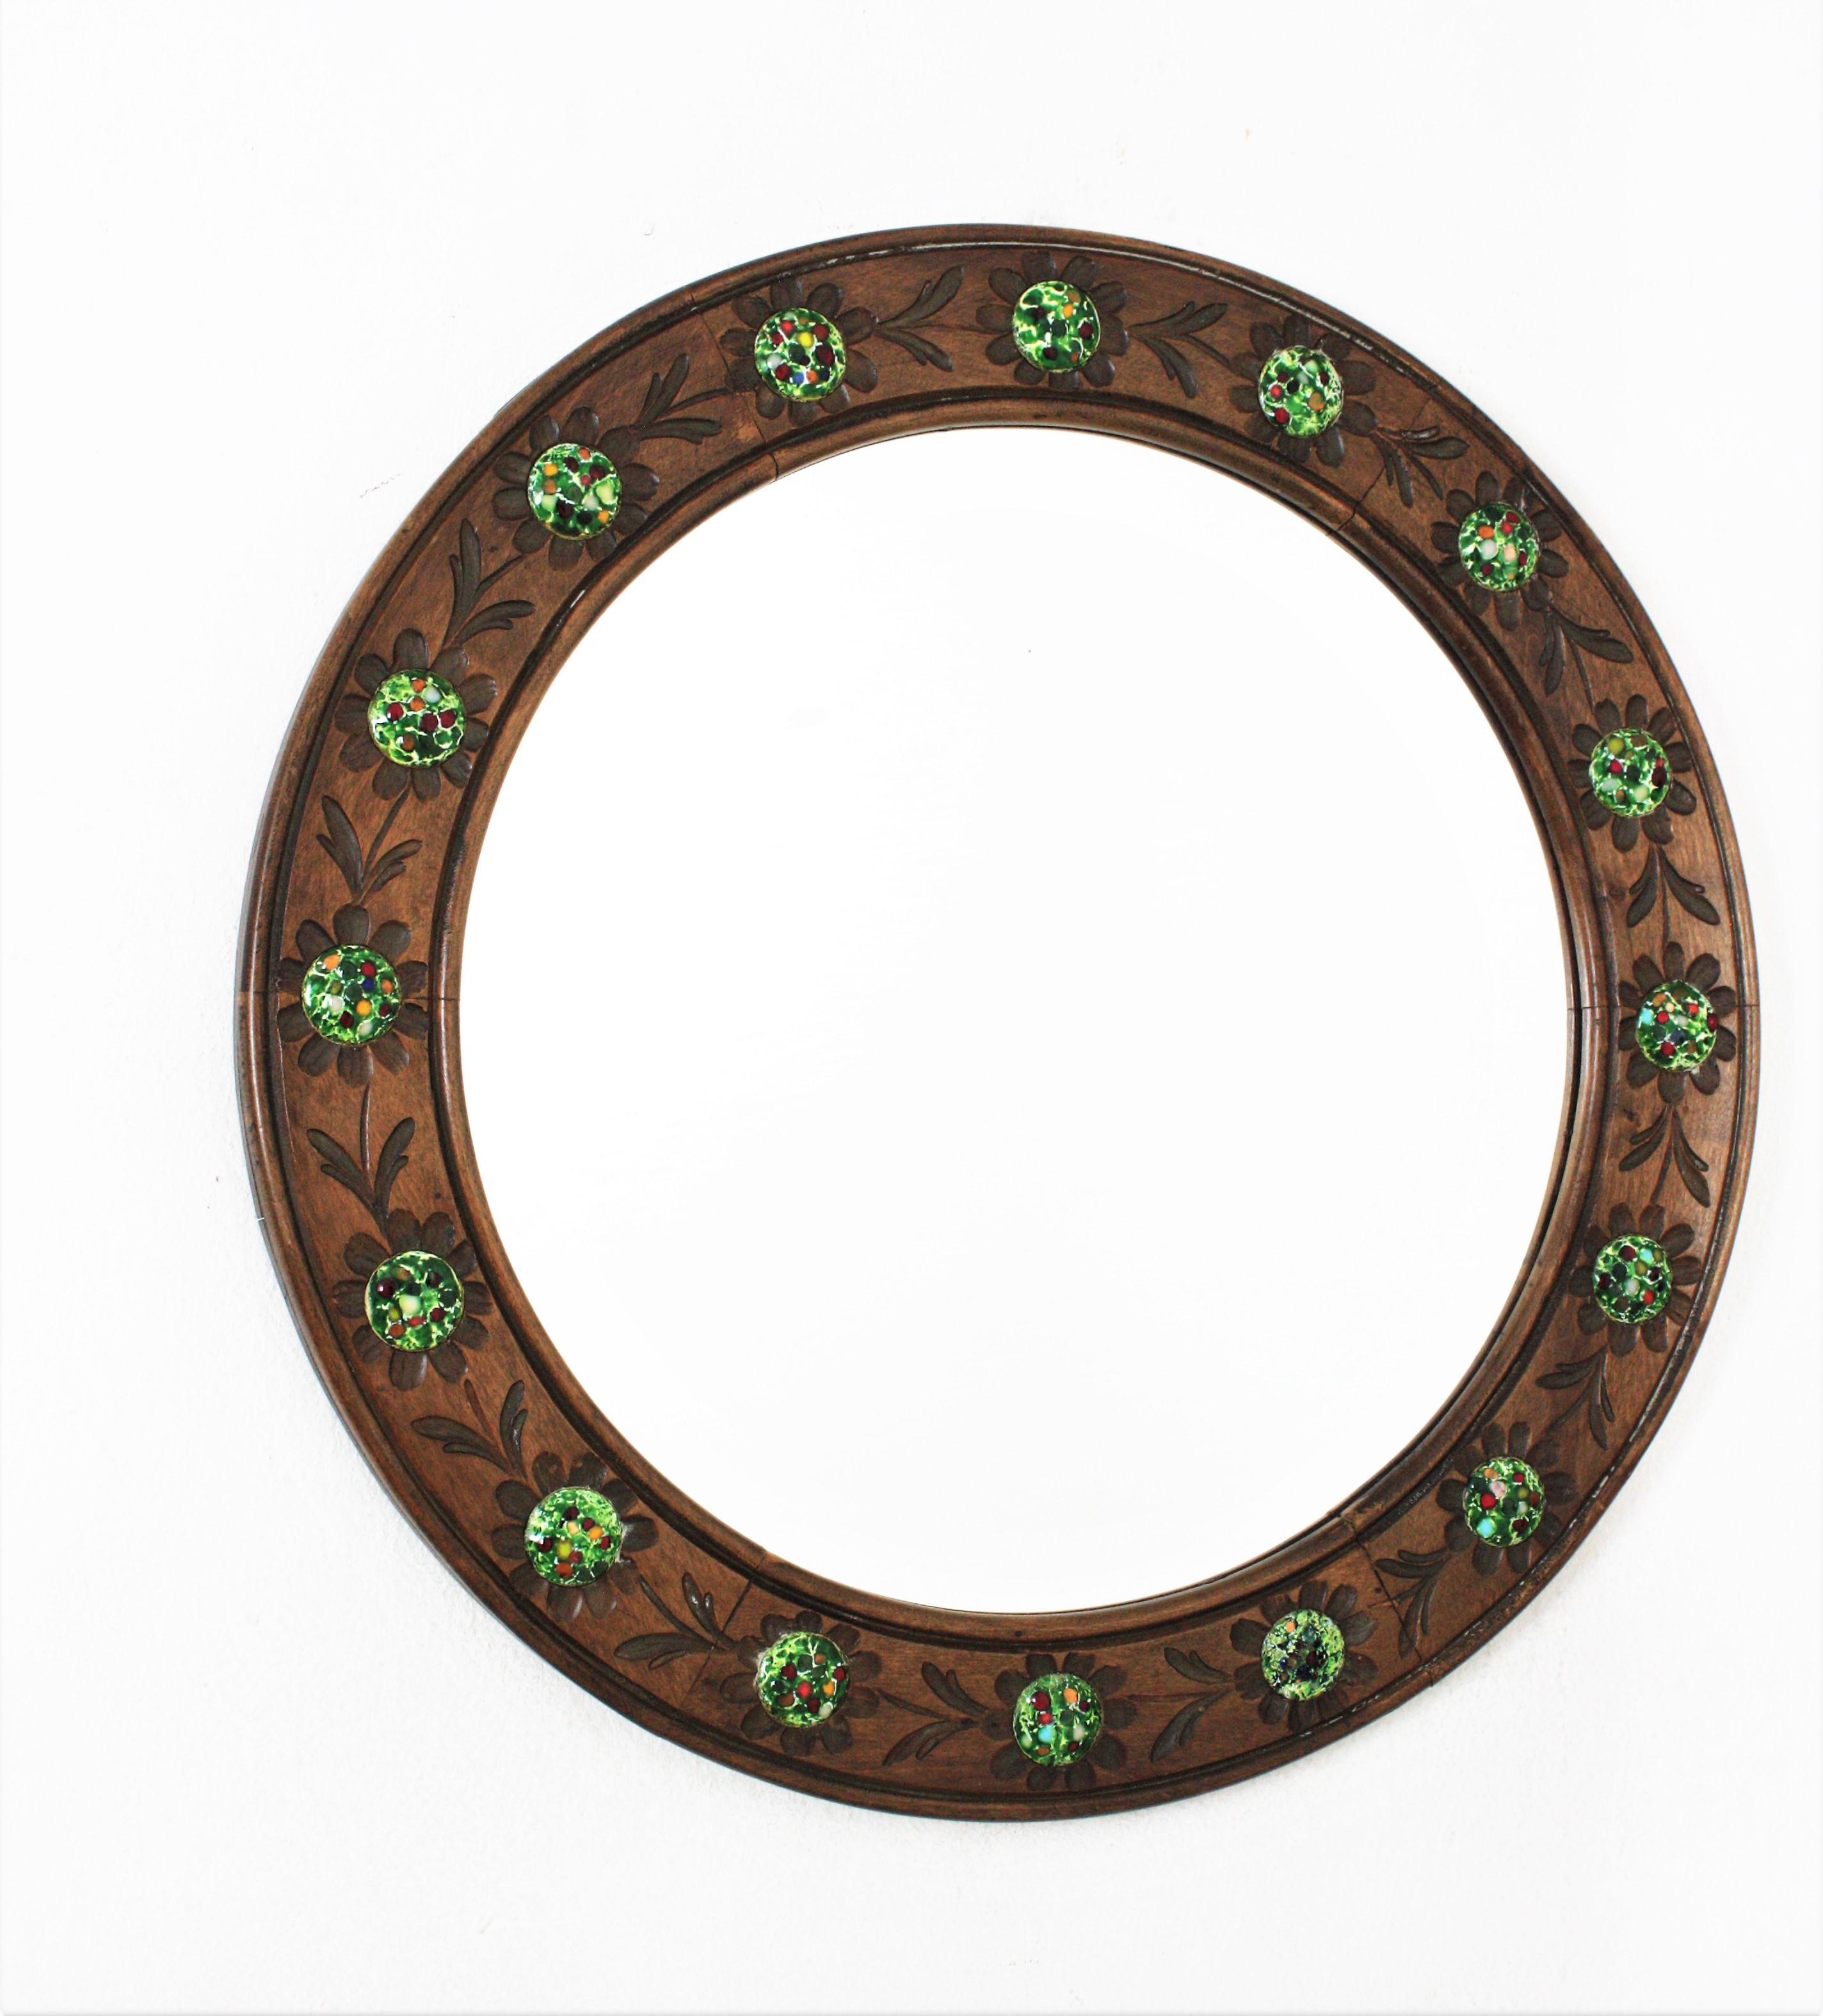 Round Wall Mirror, Walnut, Enamel, Spain, 1960s.
This wall mirror features a wooden frame surrounding a round glass. The frame has carved flowers and round multicolor enamel decorative details on the flower's central part.
This wall mirror has a